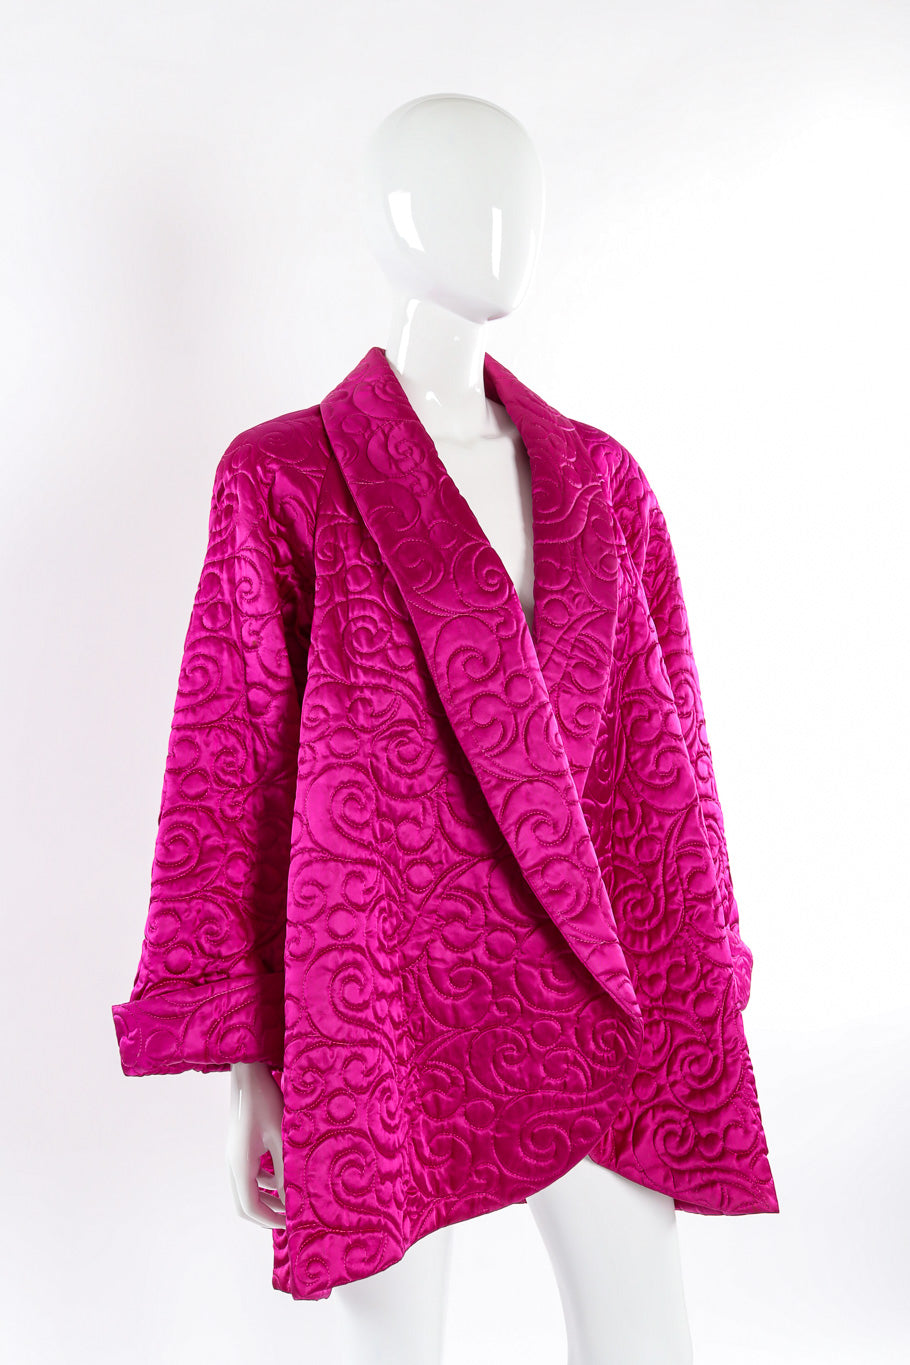 Plush oversized swirl quilted swing coat by Farinae Collection mannequin 3/4 view @recessla